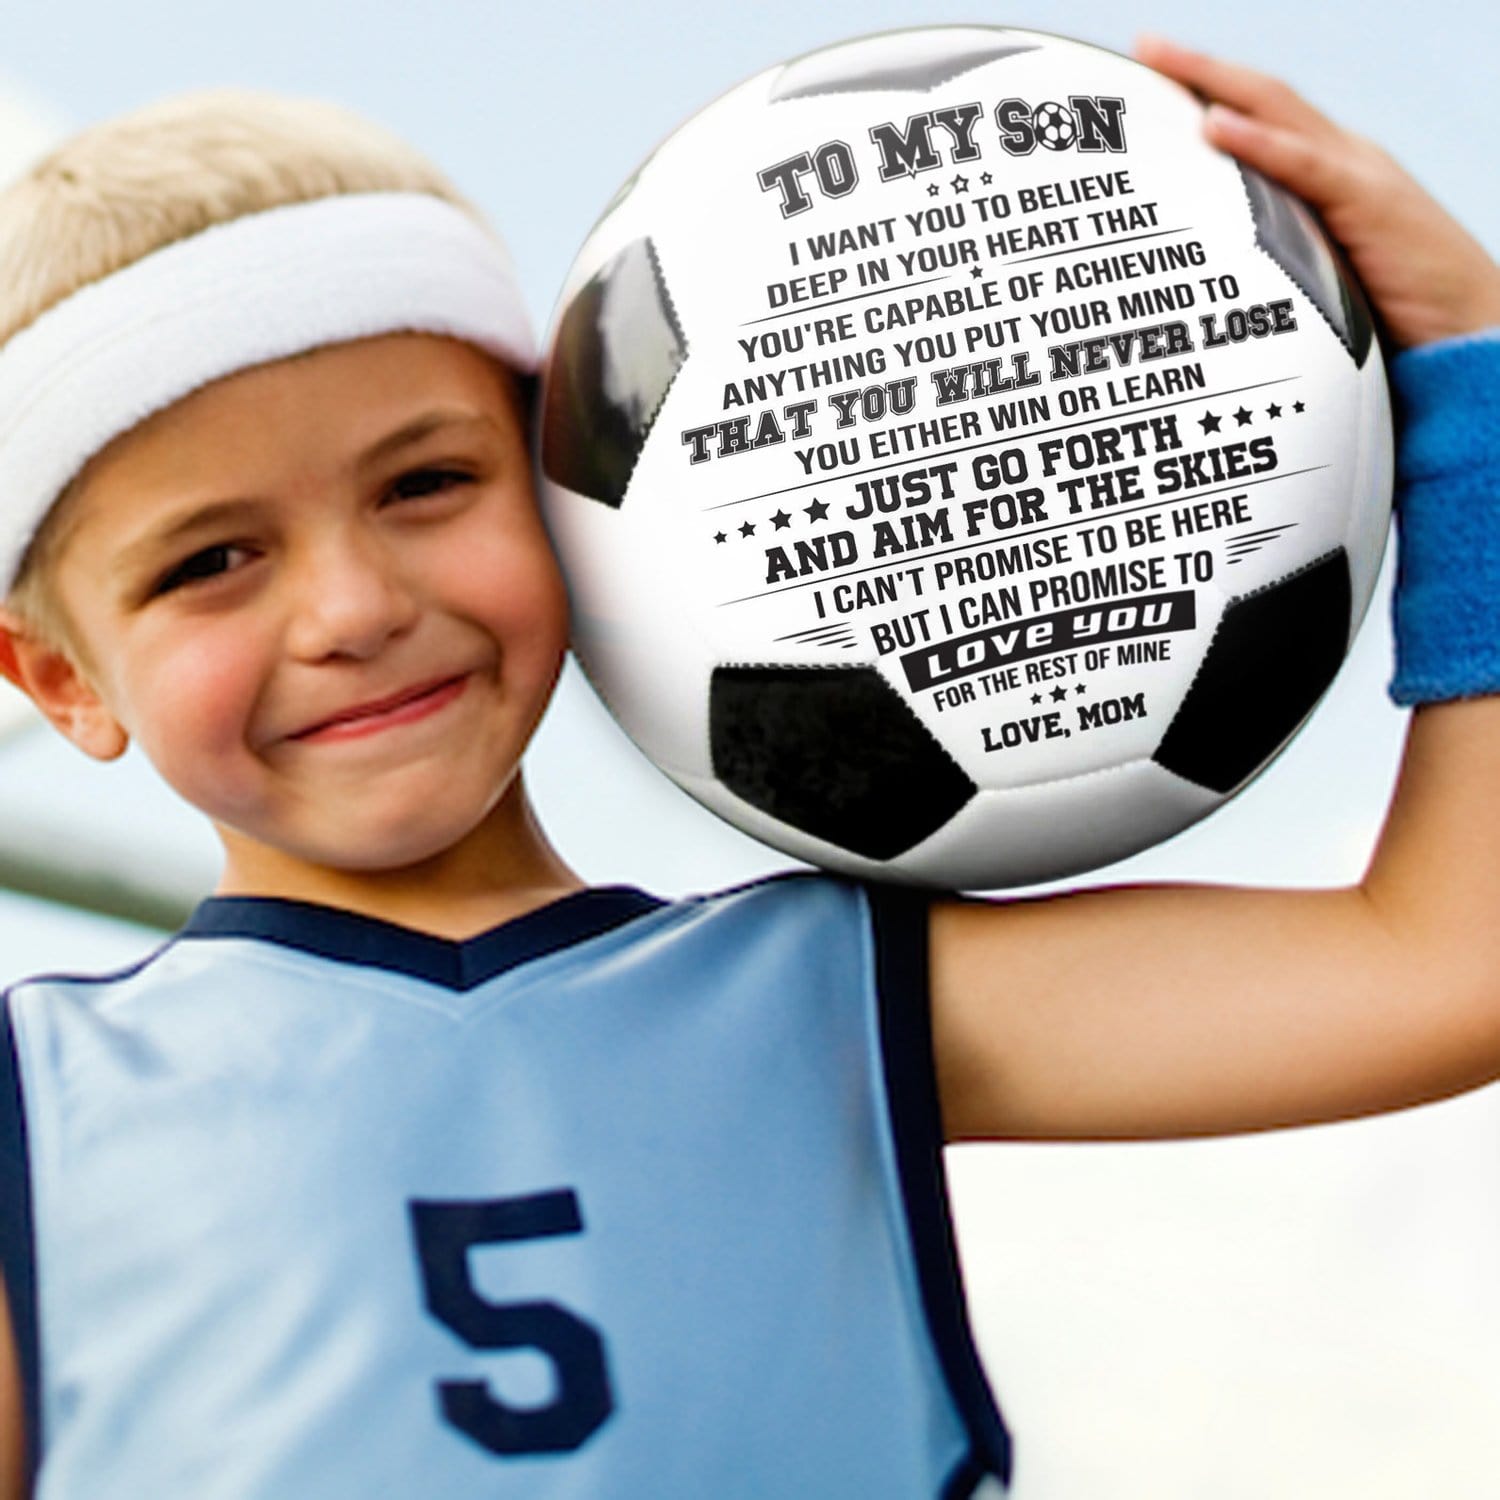 Soccer Ball Mom To Son - You Will Never Lose Personalized Soccer Ball GiveMe-Gifts